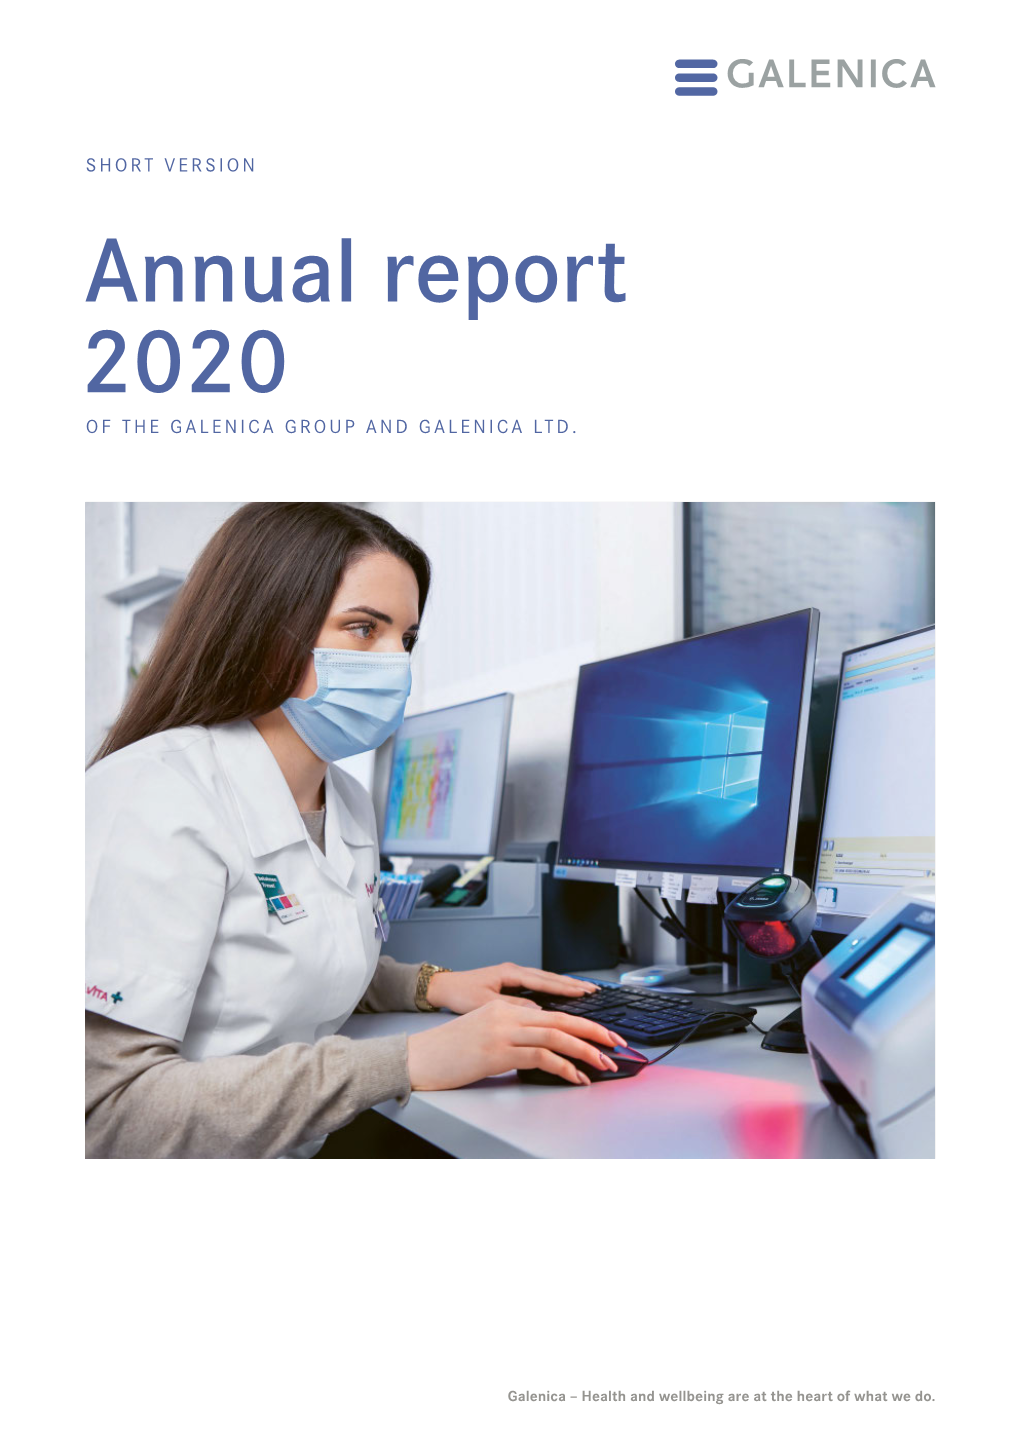 Annual Report 2020 of the GALENICA GROUP and GALENICA LTD